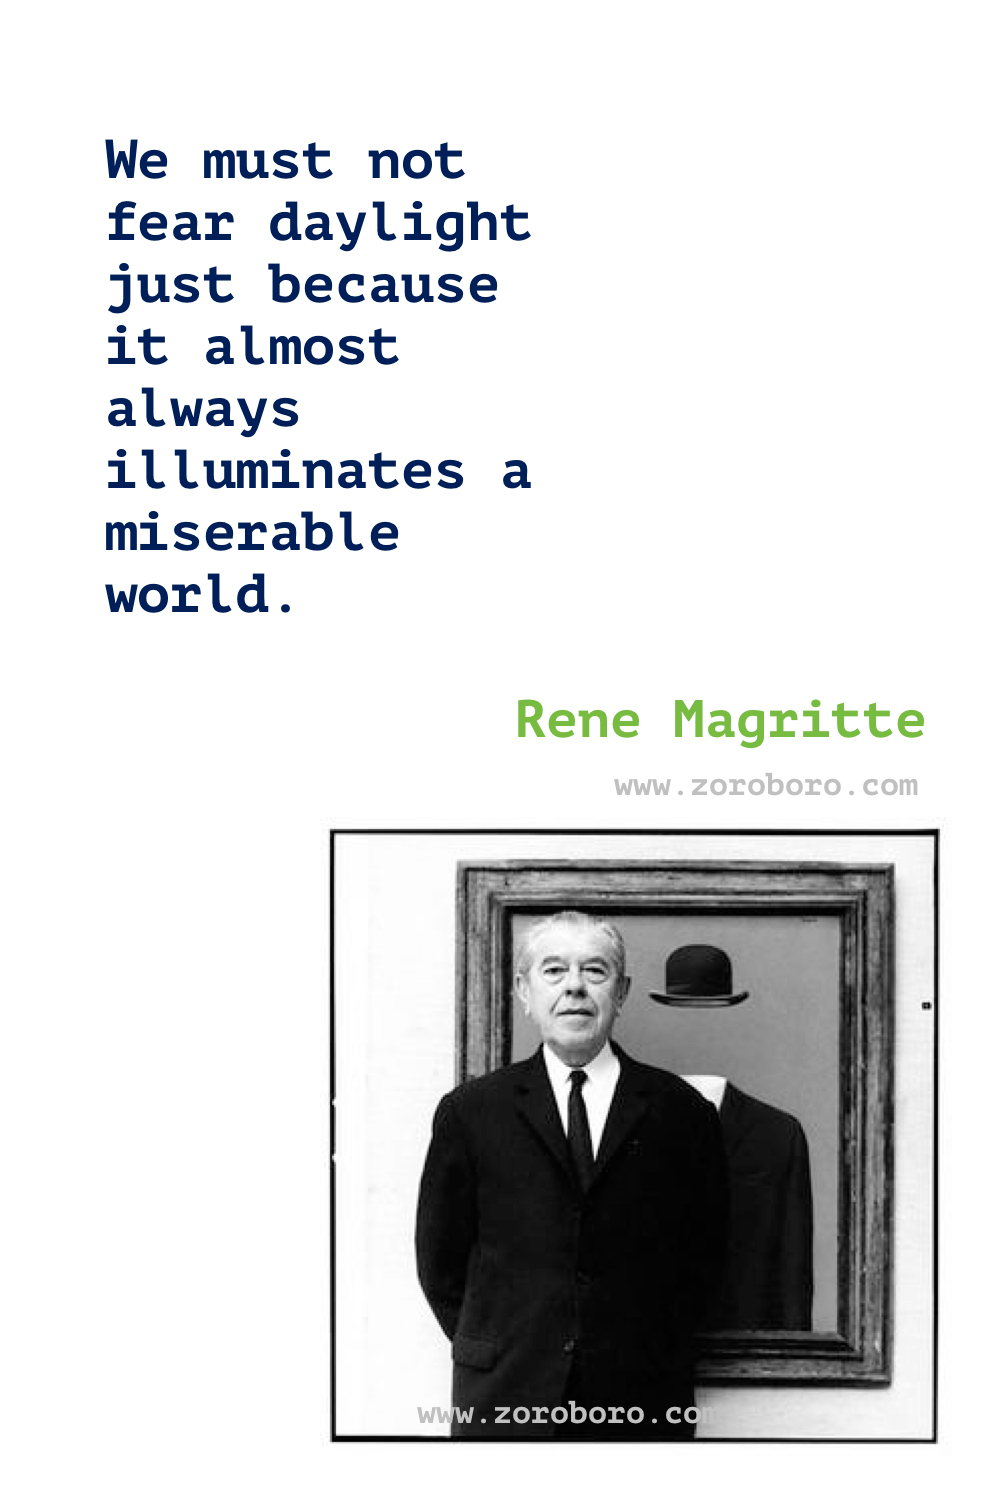 Rene Magritte Quotes. Rene Magritte Art Quotes. Rene Magritte Painting Quotes. Rene Magritte Mystery Quotes. Rene Magritte